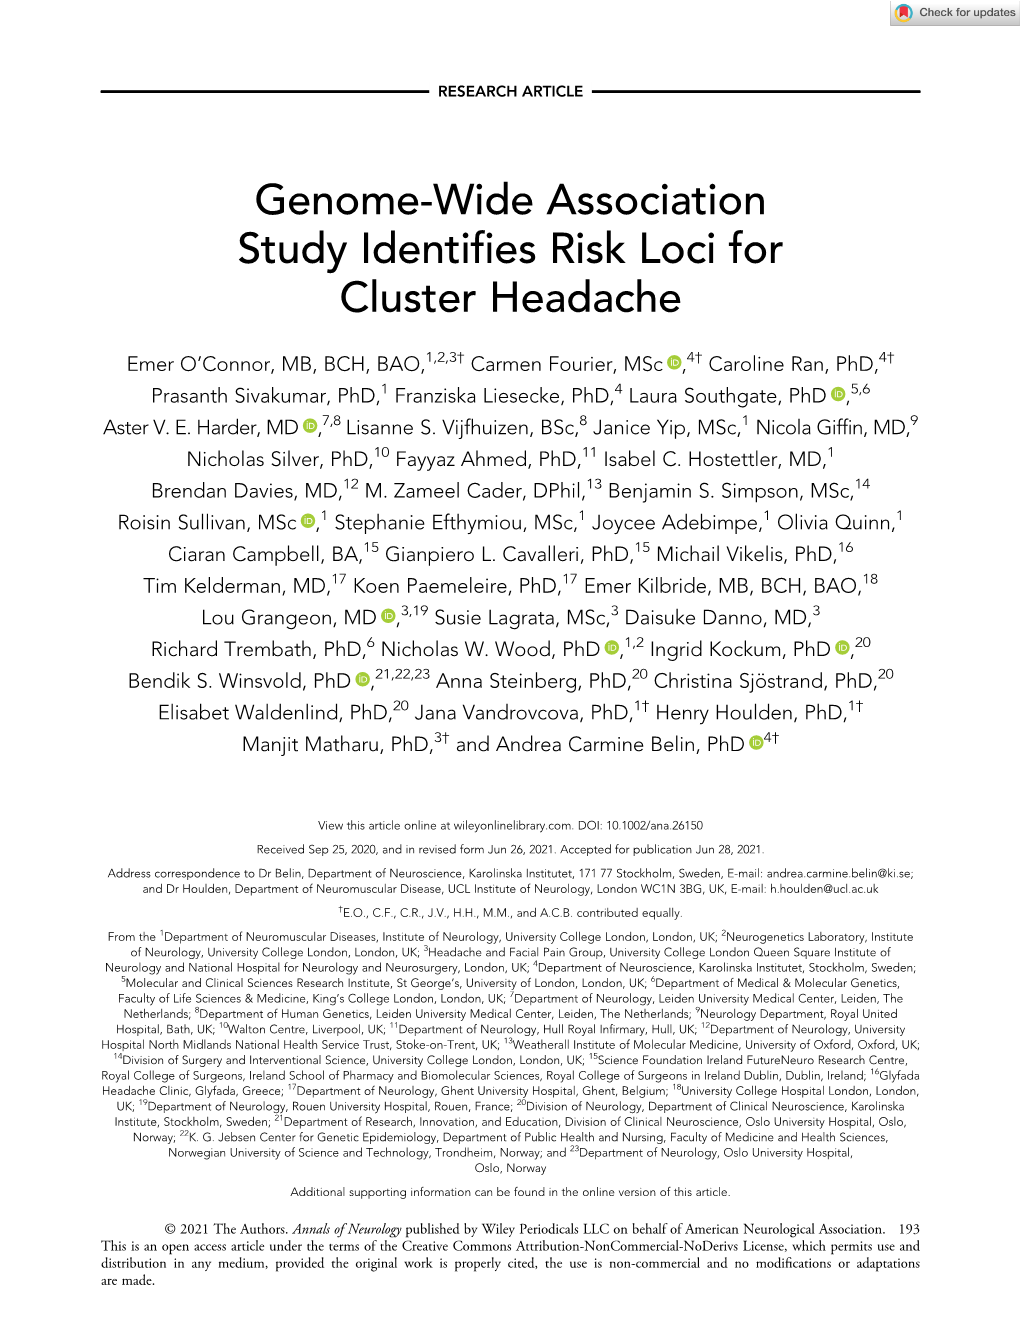 Genome‐Wide Association Study Identifies Risk Loci for Cluster